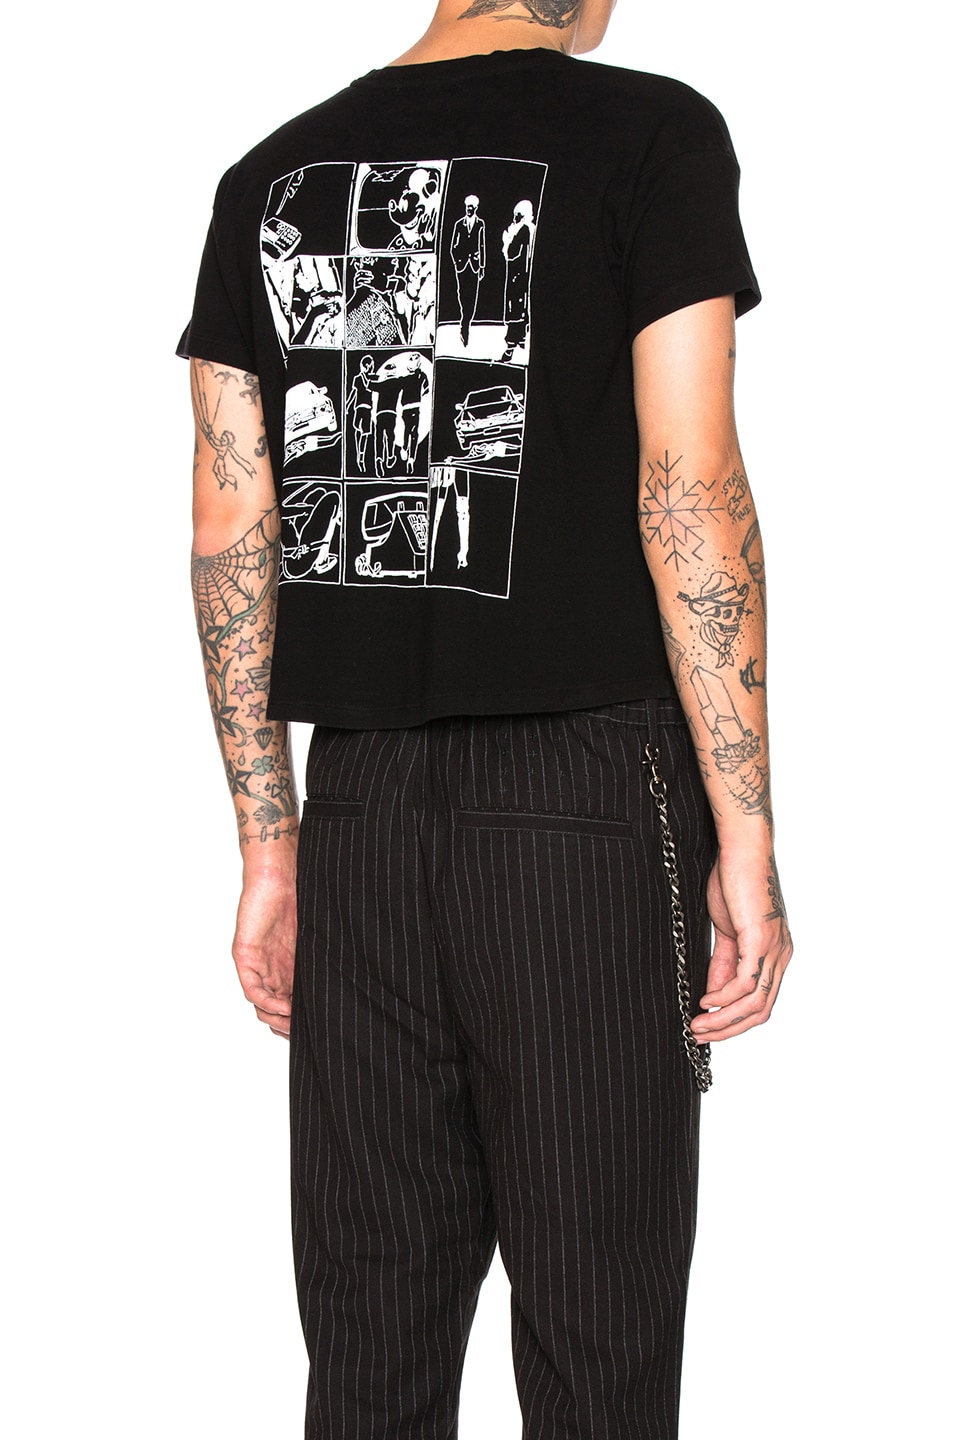 Image 1 of Enfants Riches Deprimes Inverse Print Tee in Black & White